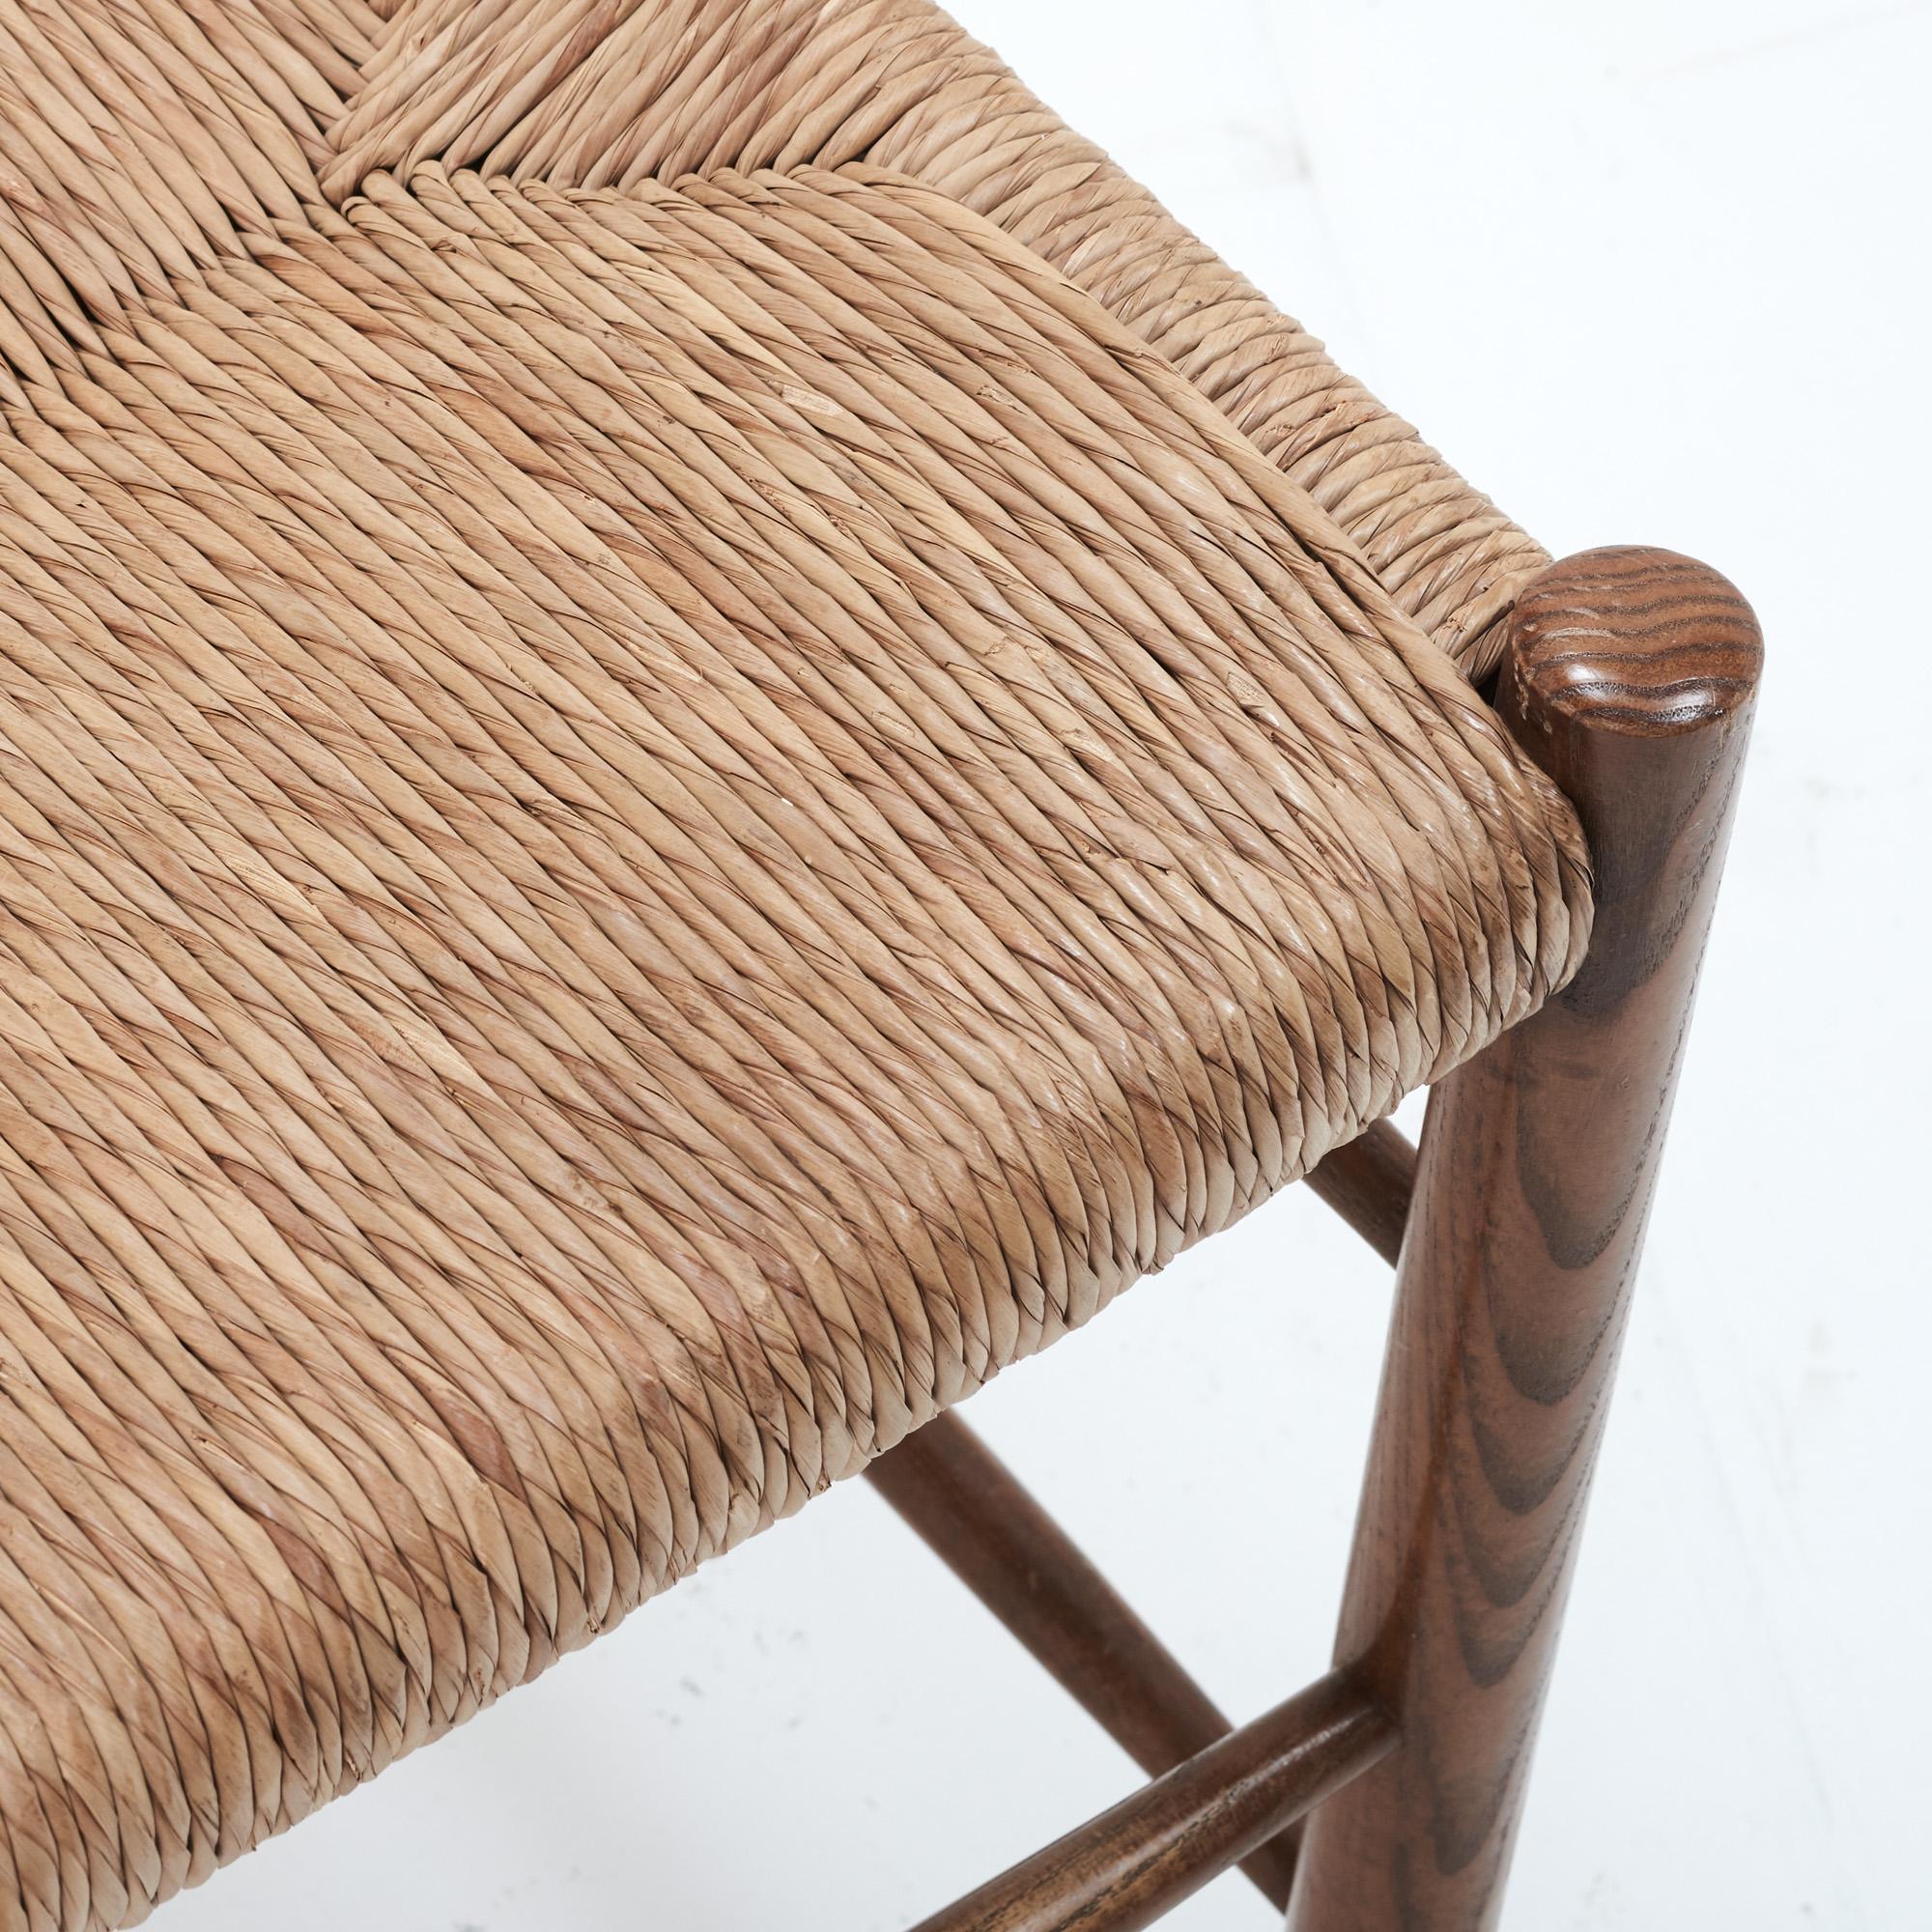 Mid-Century Modern 1950's “Dordogne” Chair in Straw & Wood by Charlotte Perriand for Robert Sentou